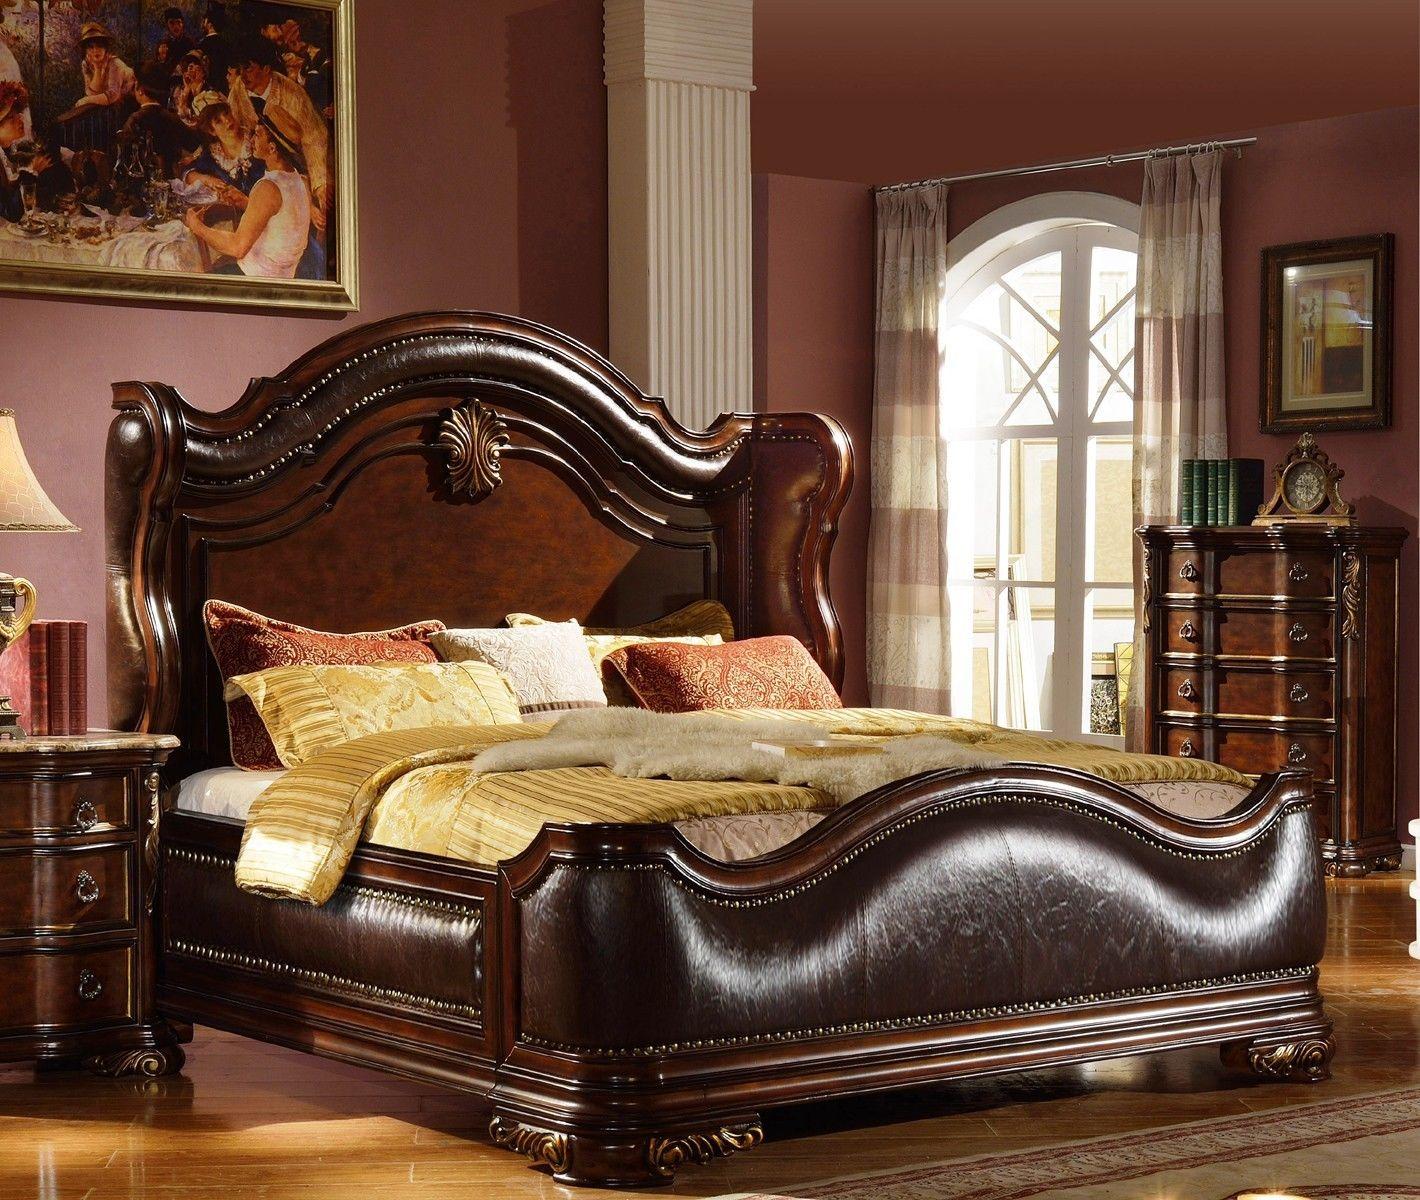 Classic, Traditional Sleigh Bed B3000 B3000- EK in Cherry Bonded Leather